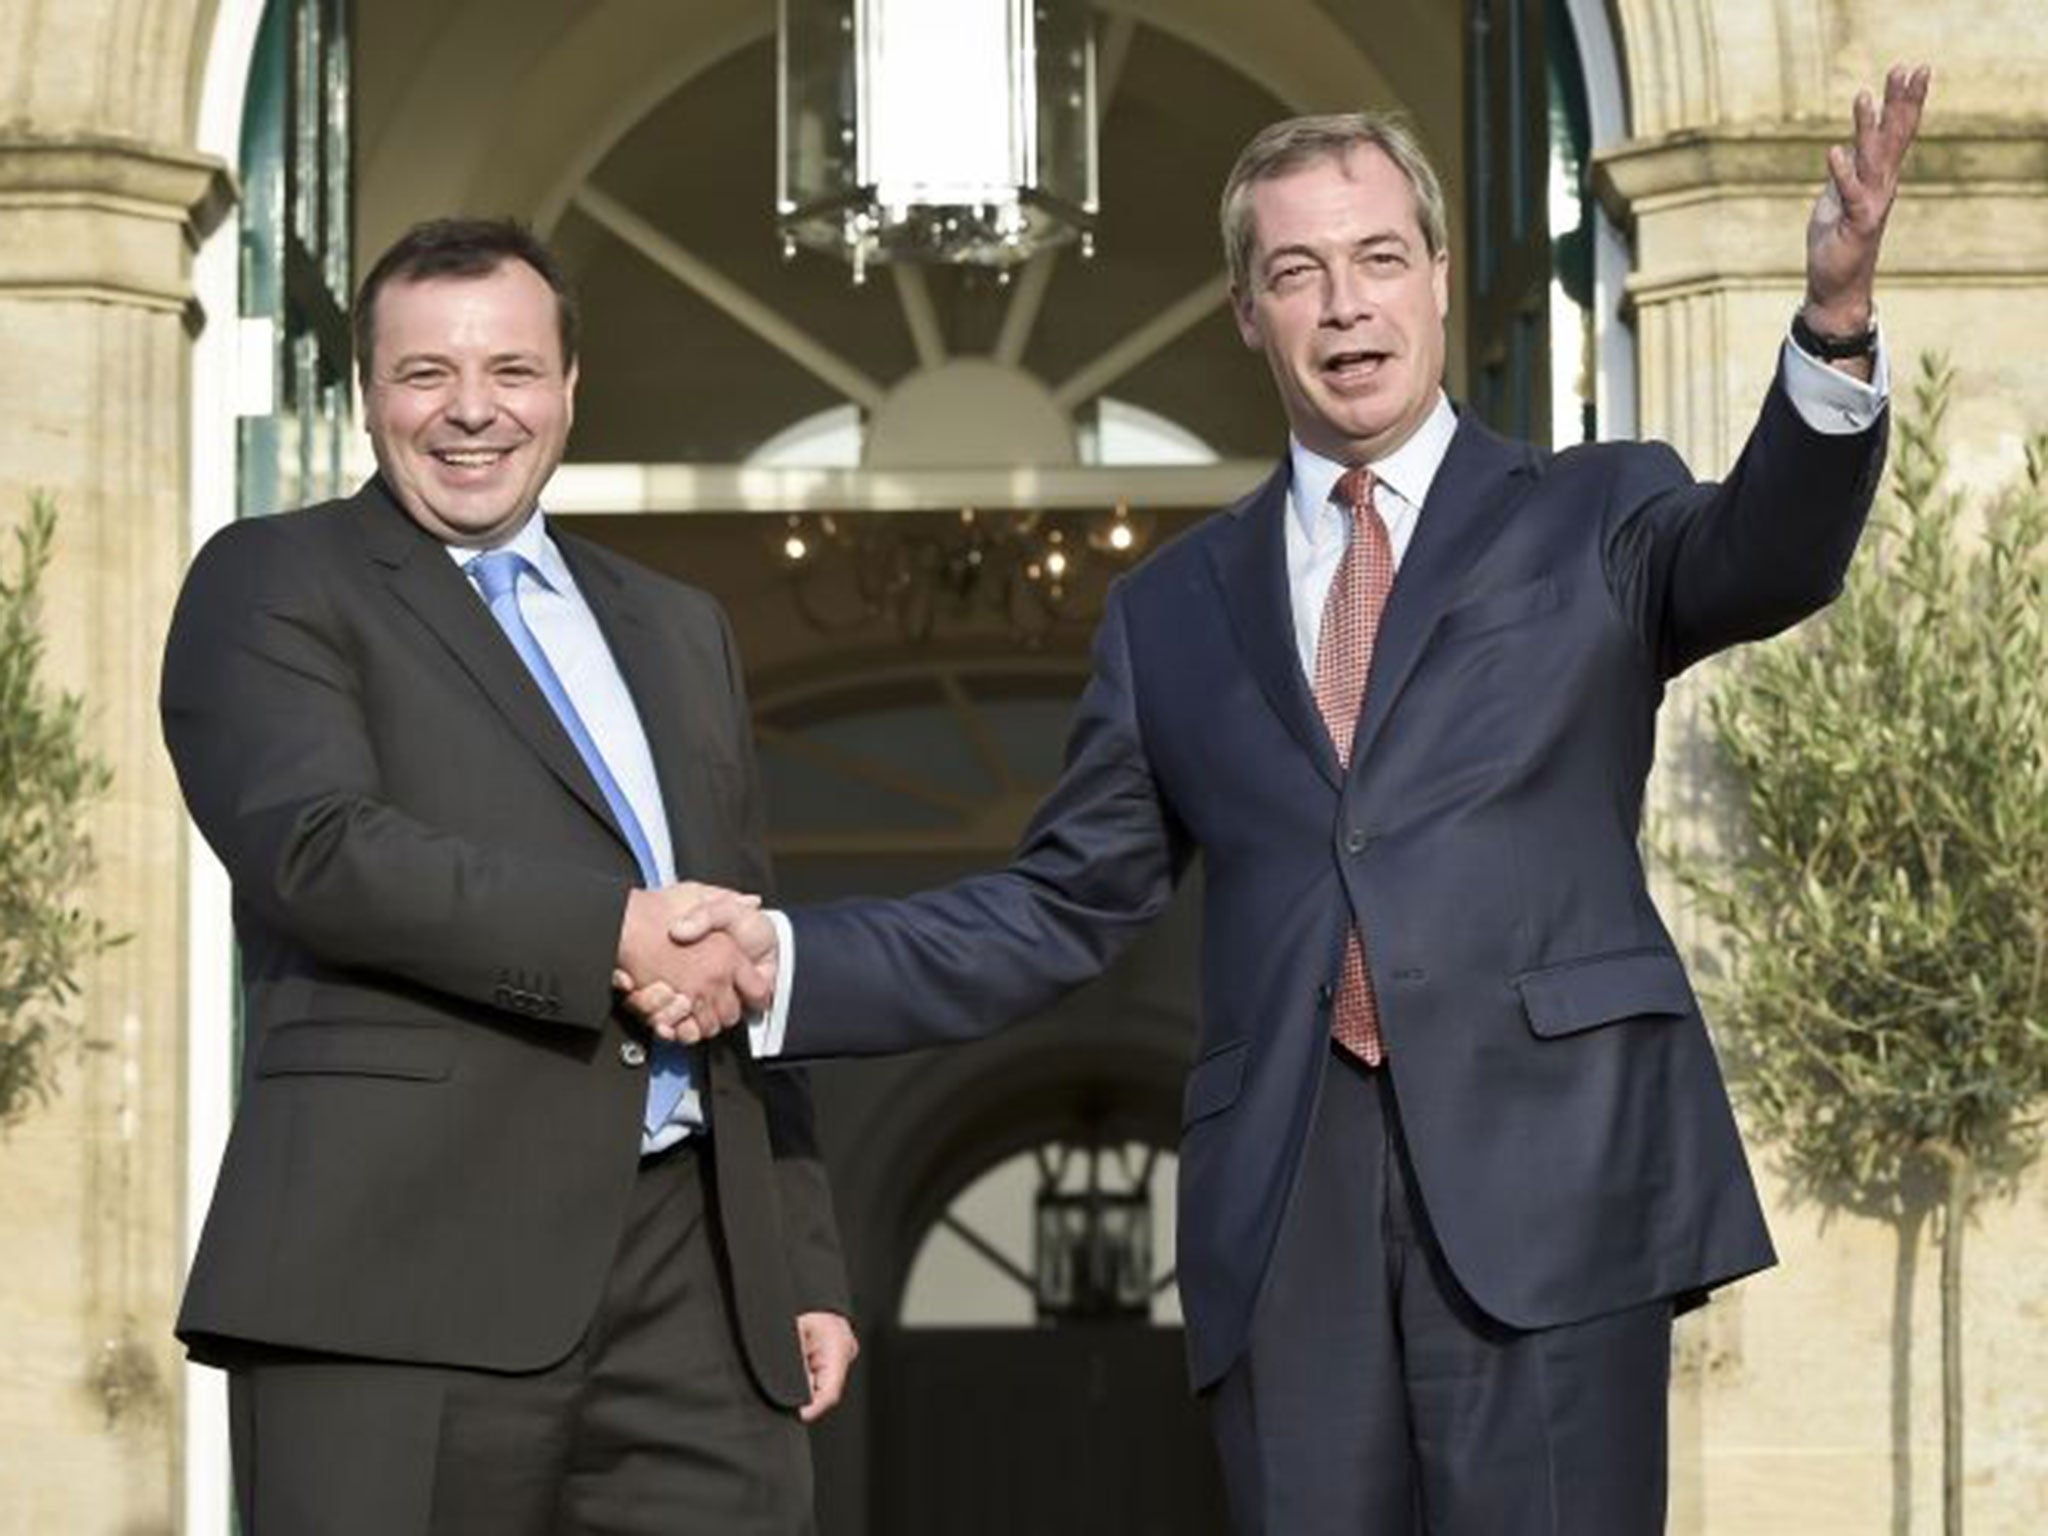 Multi-millionaire Arron Banks helped fund the Leave.EU campaign, in which Nigel Farage played a key role